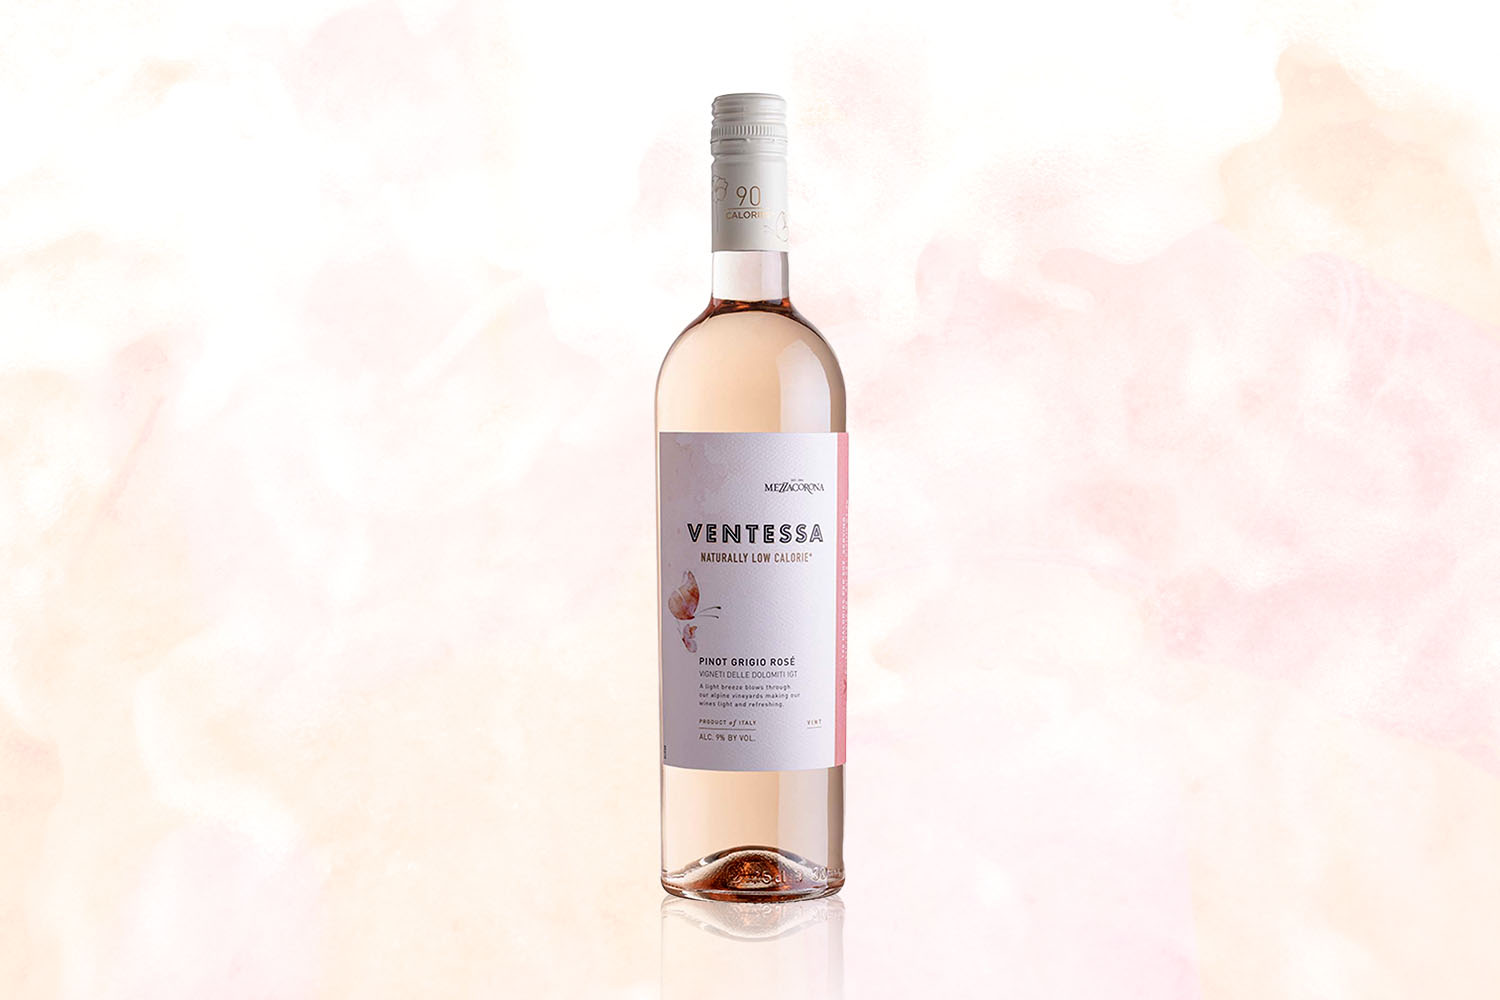 A bottle of Ventessa Pinot Grigio Rosé on a pale pink background